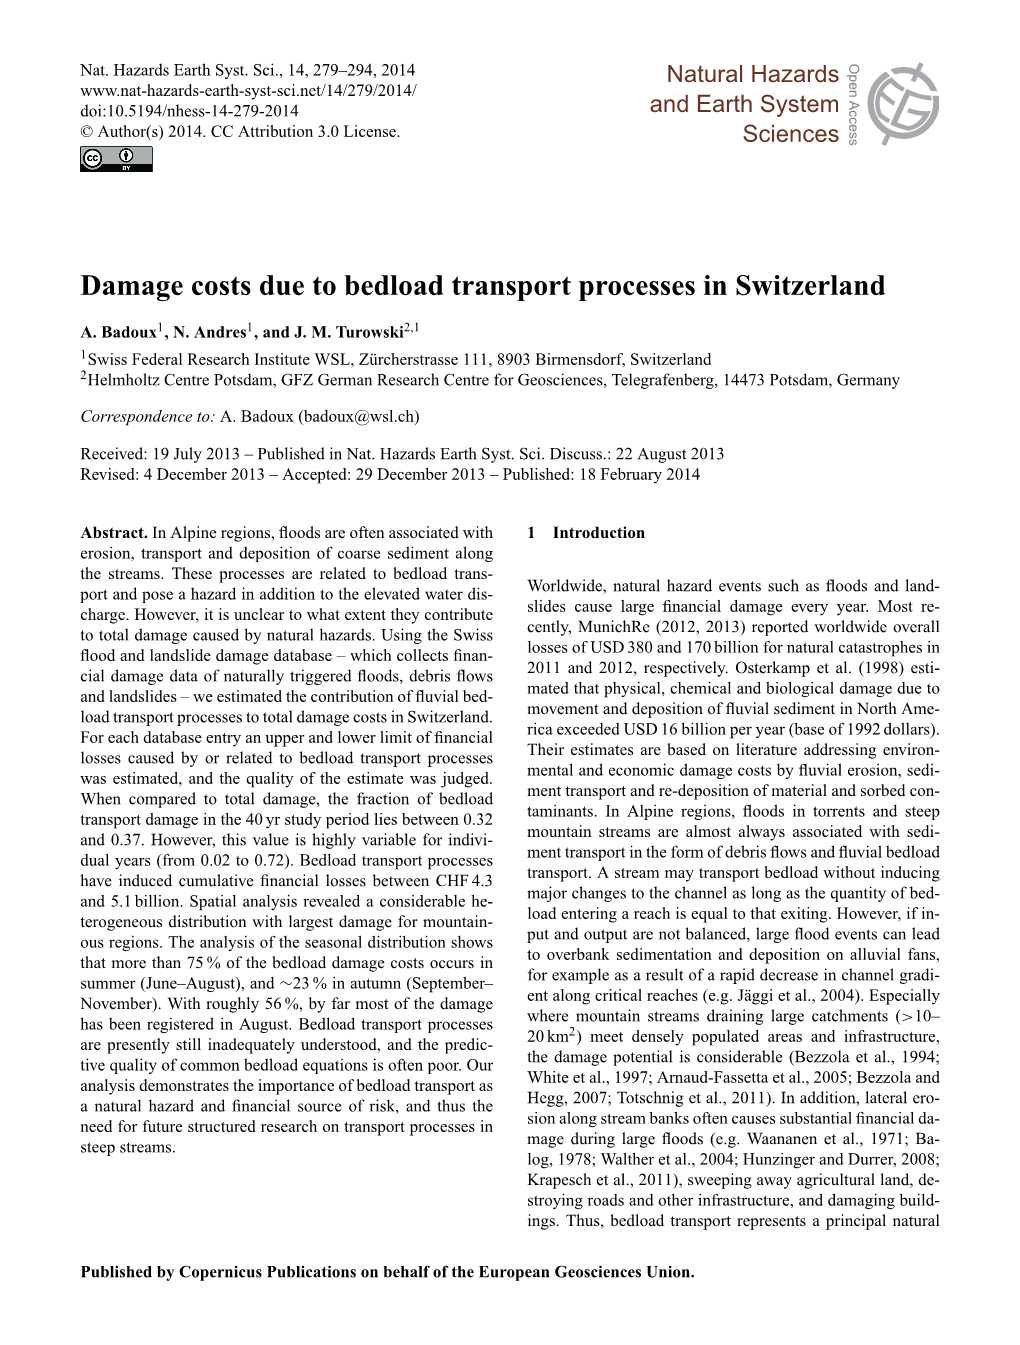 Damage Costs Due to Bedload Transport Processes in Switzerland